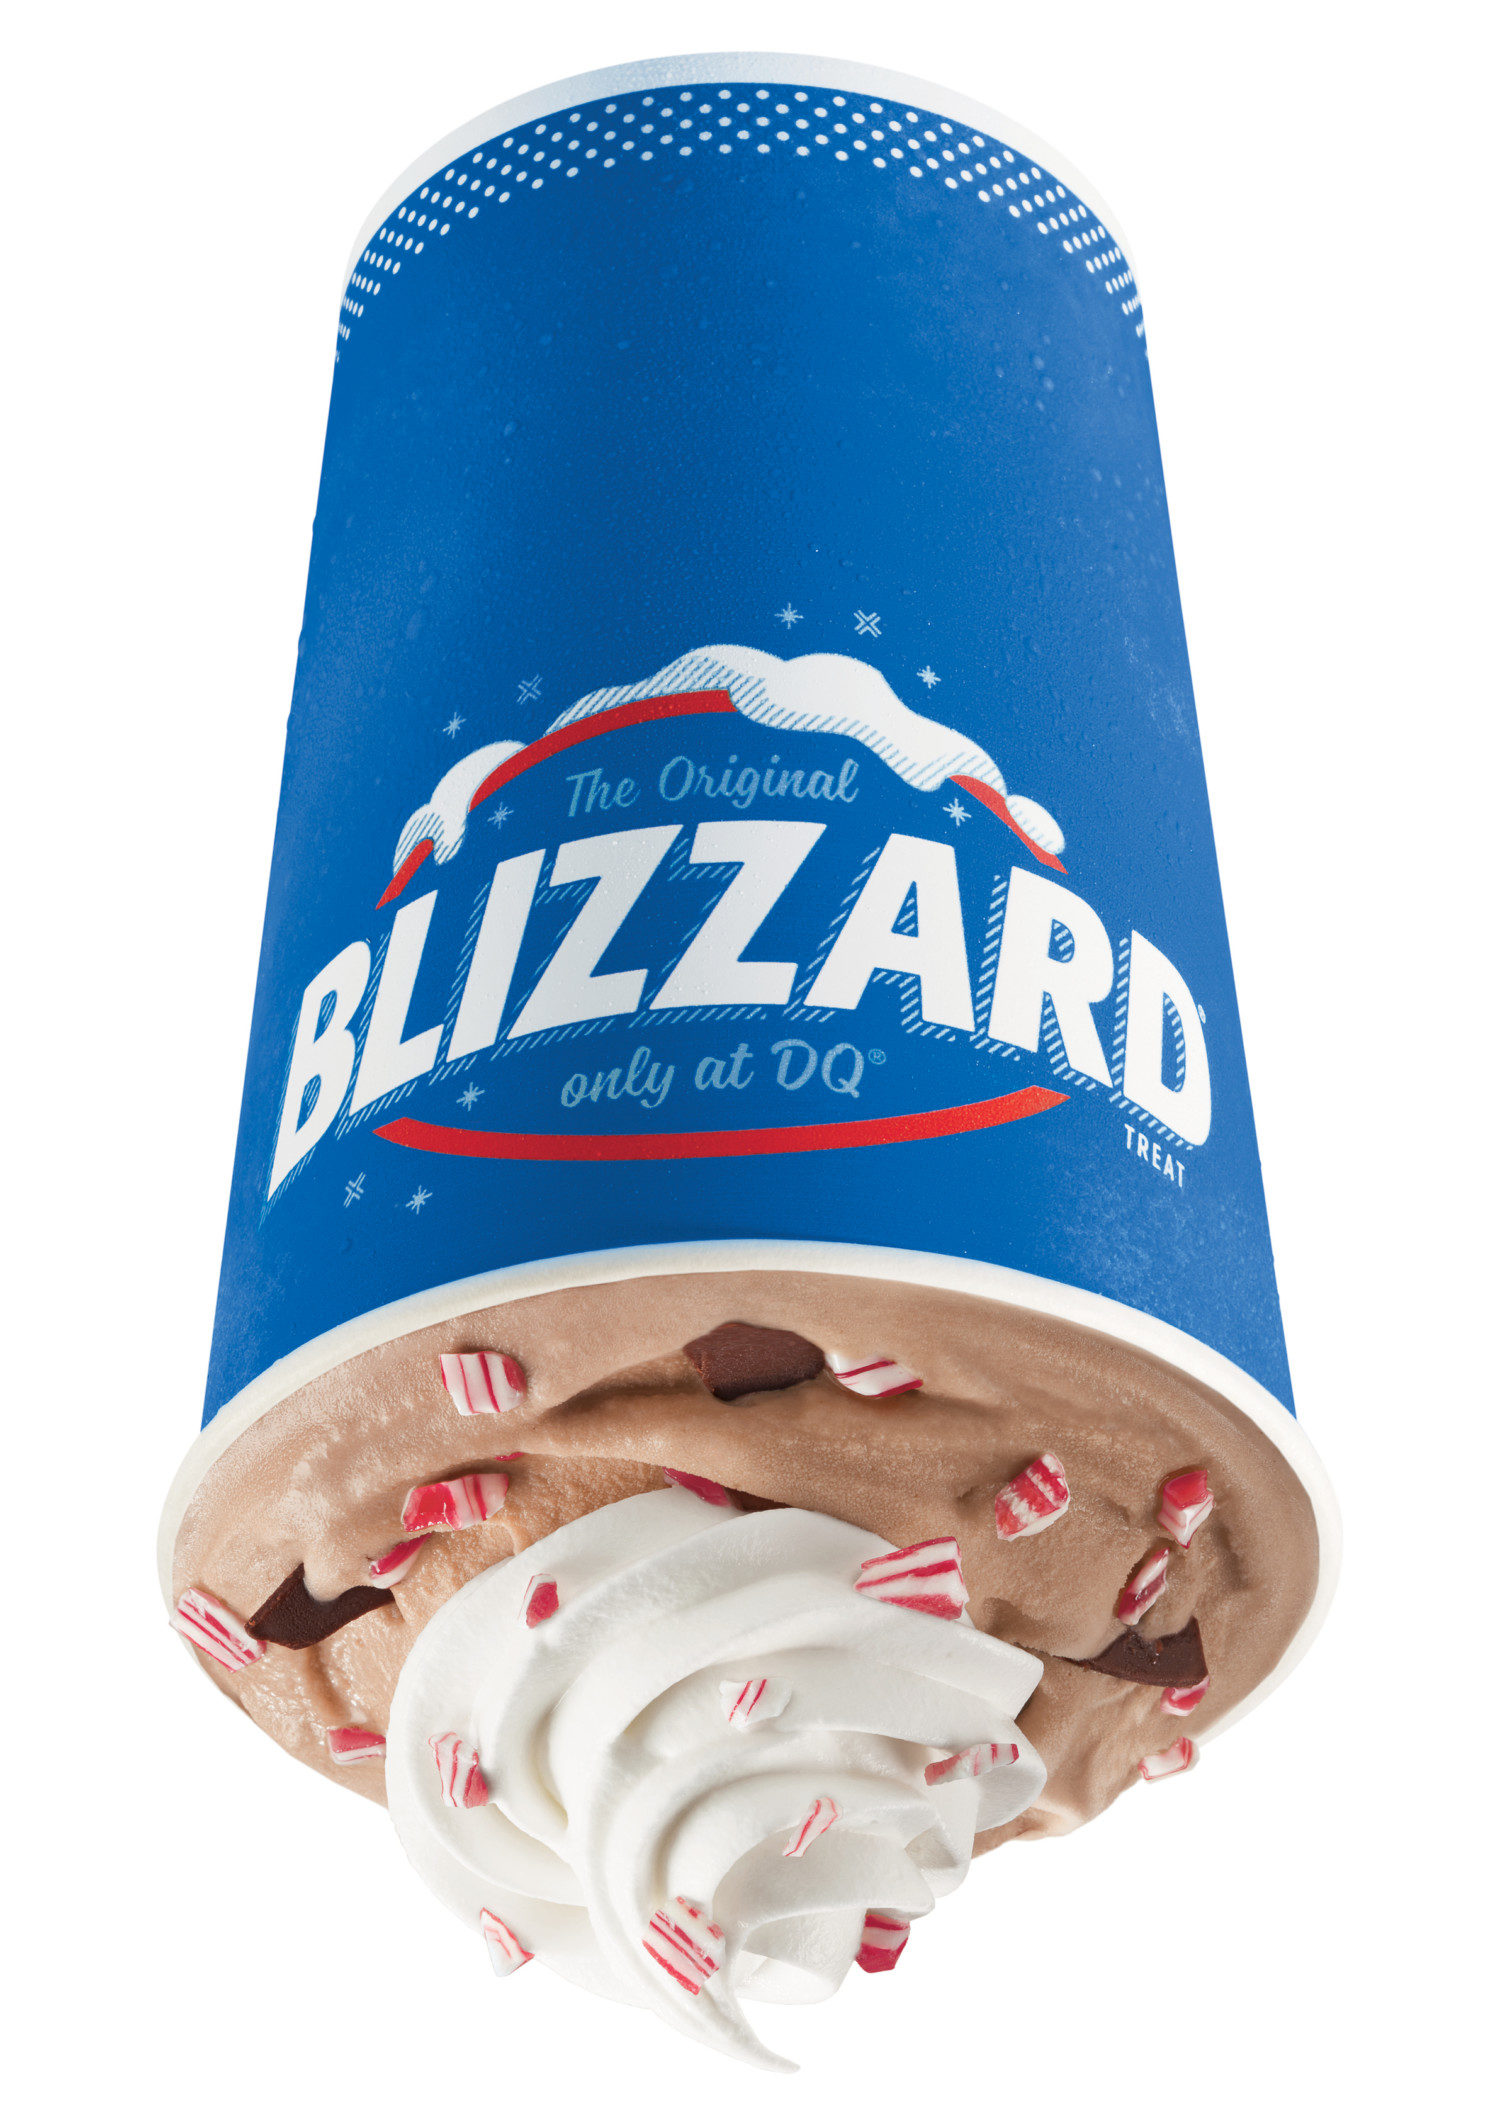 Dairy Queen’s Peppermint Hot Cocoa Blizzard Is Back For The Holidays.